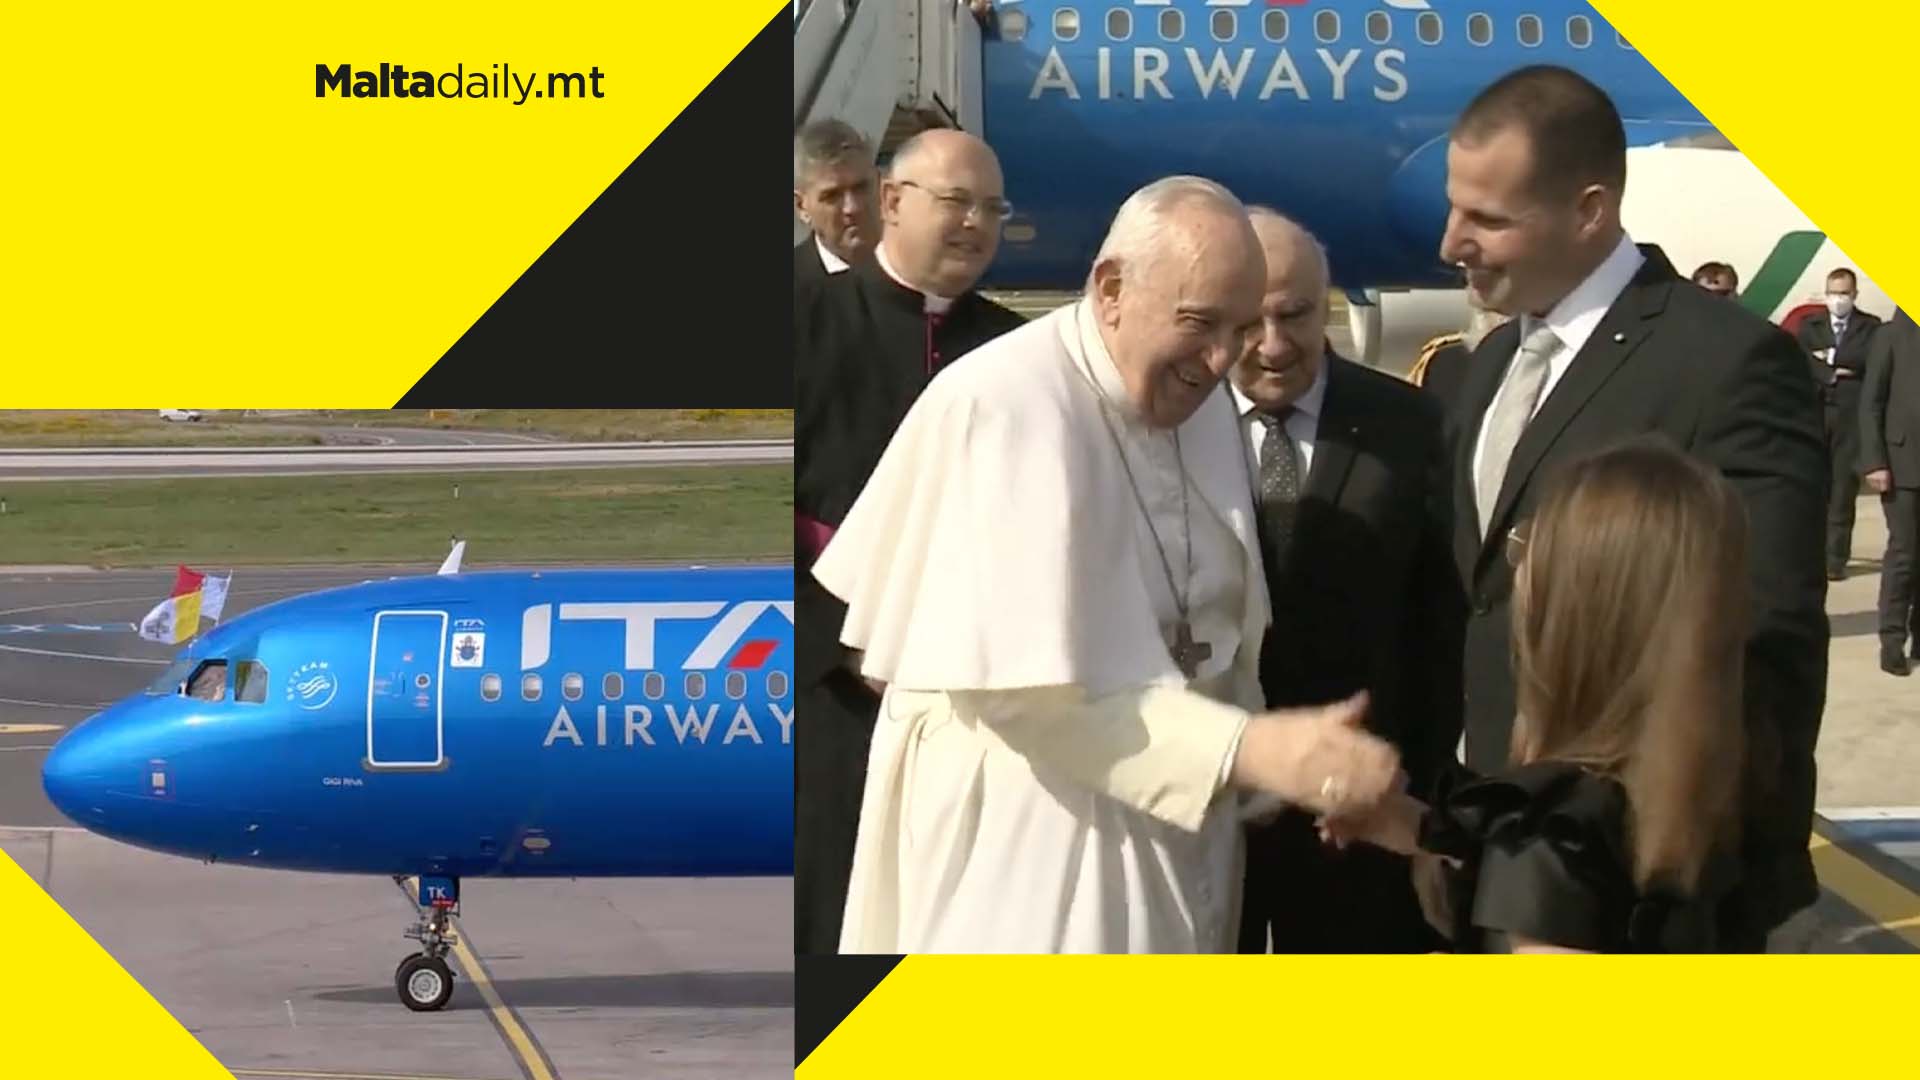 WATCH: Pope Francis arrives in Malta for long-awaited visit